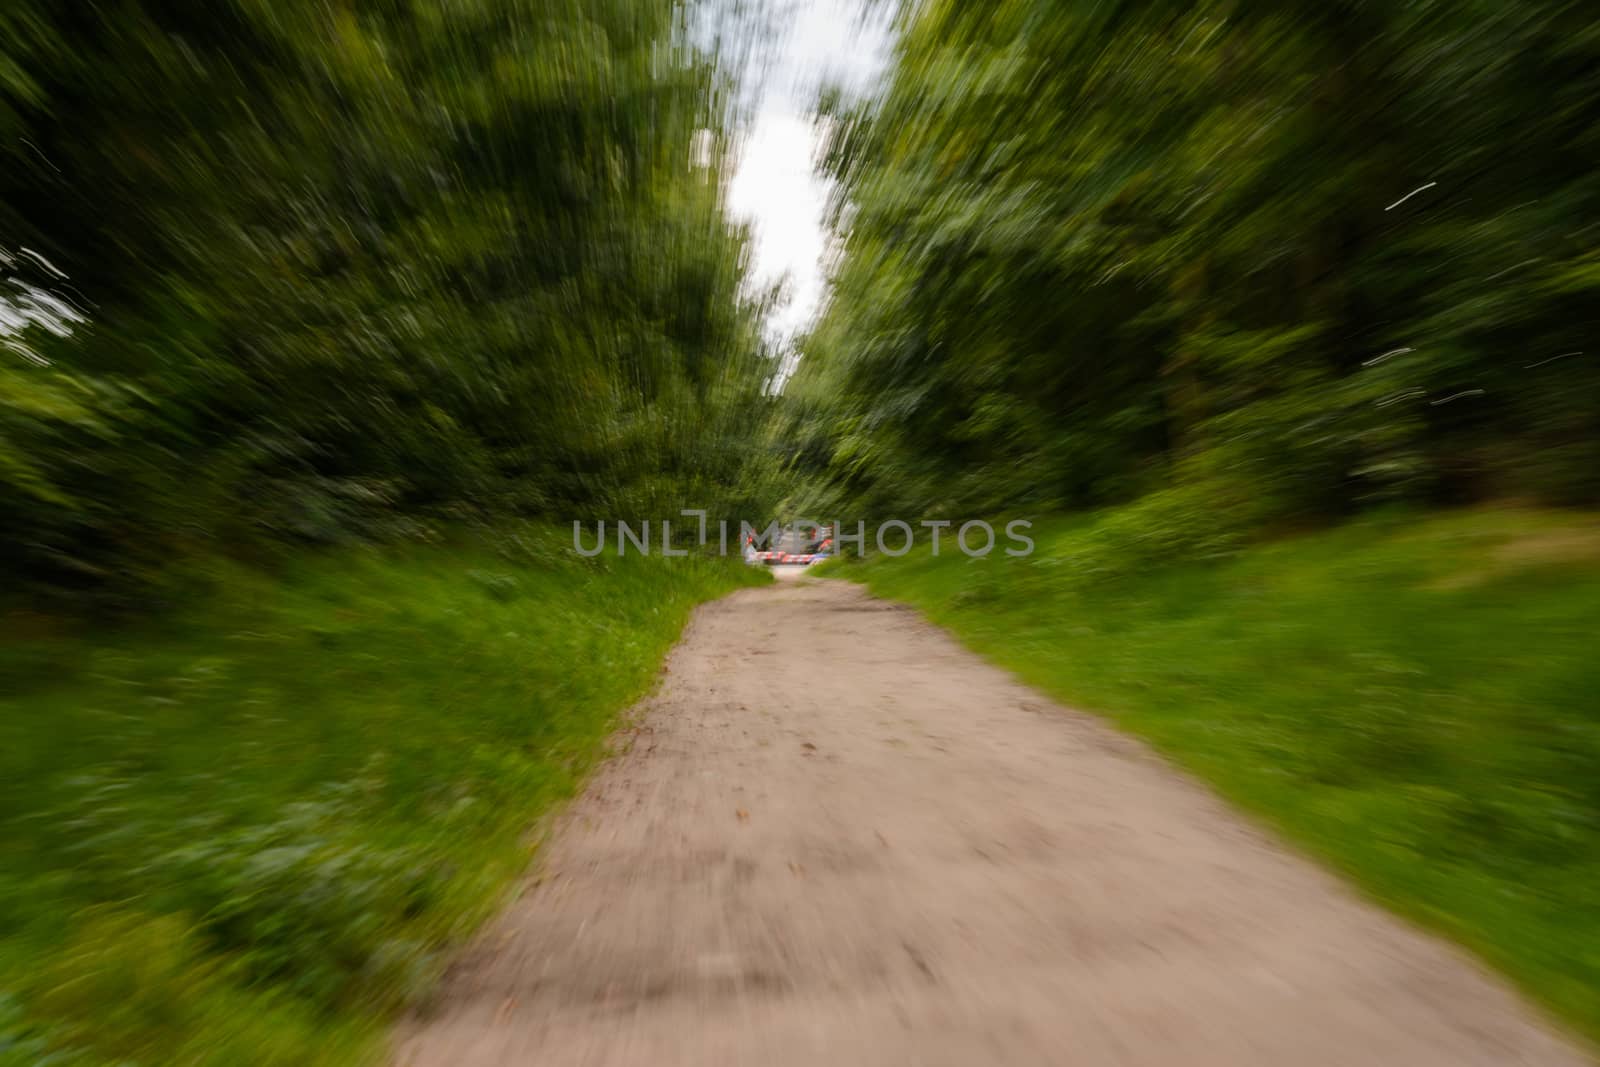 Zoom effect of path leading towards train crossing